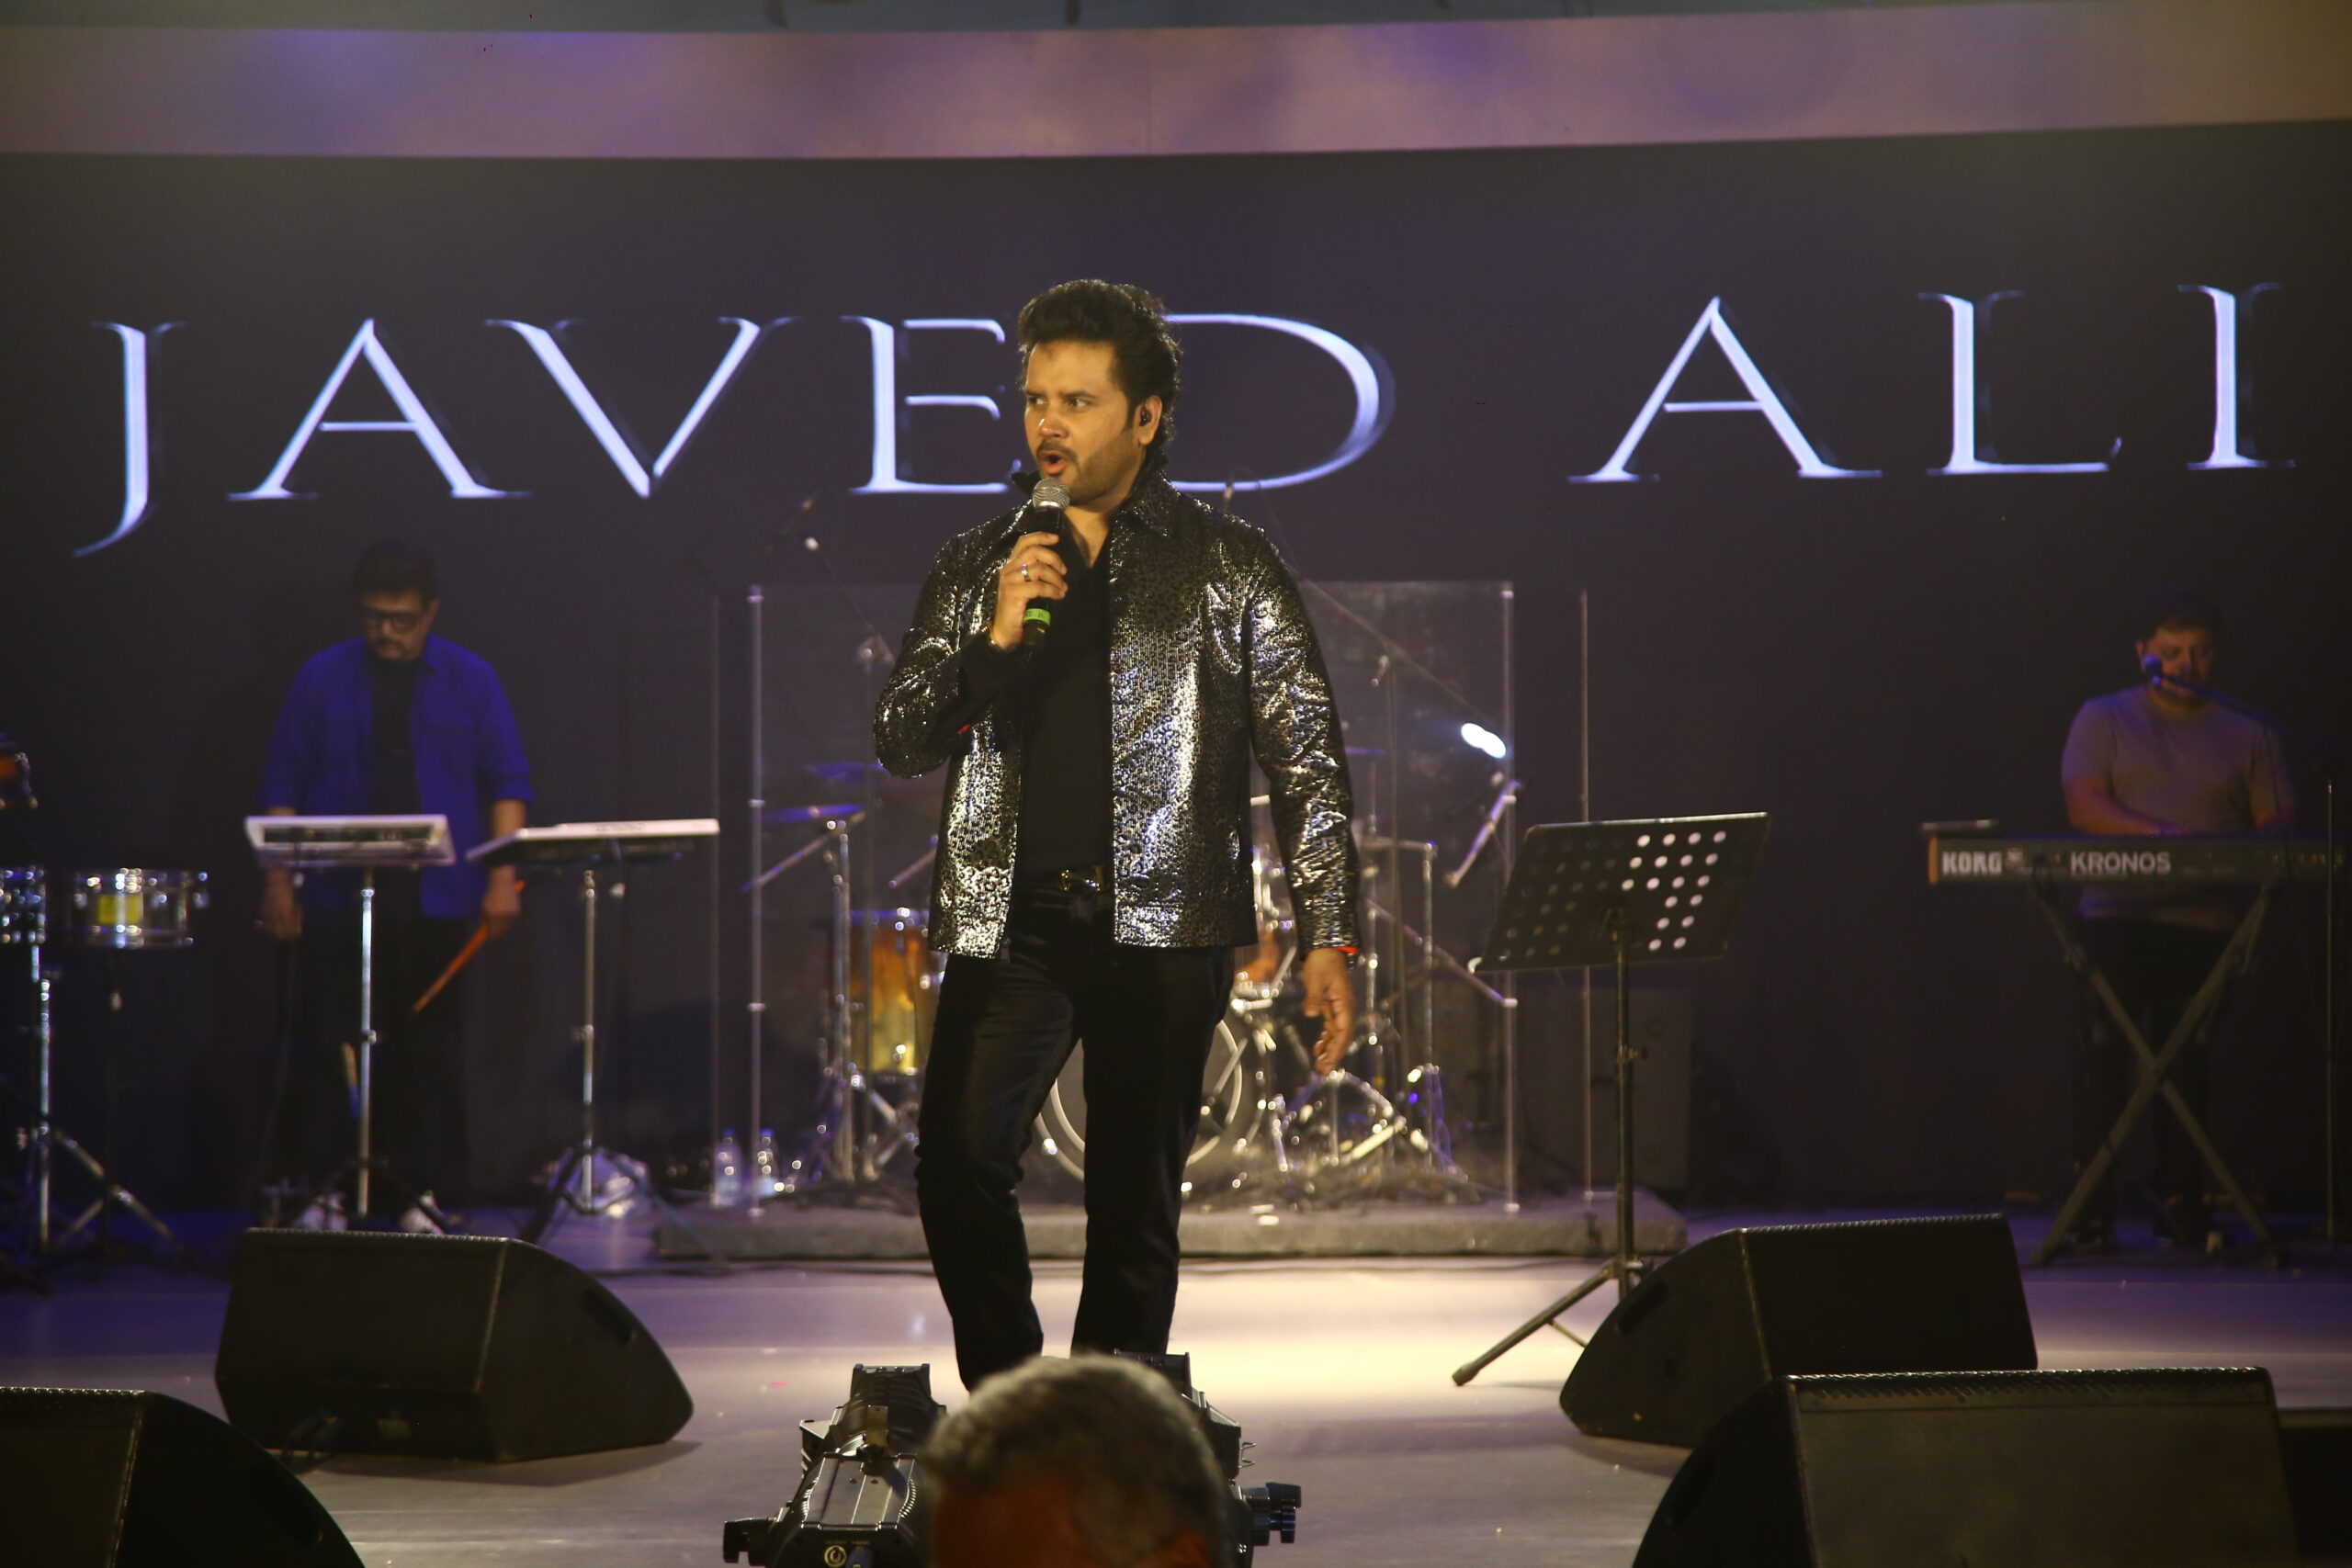 Javed Ali performing at a corporate event in Delhi